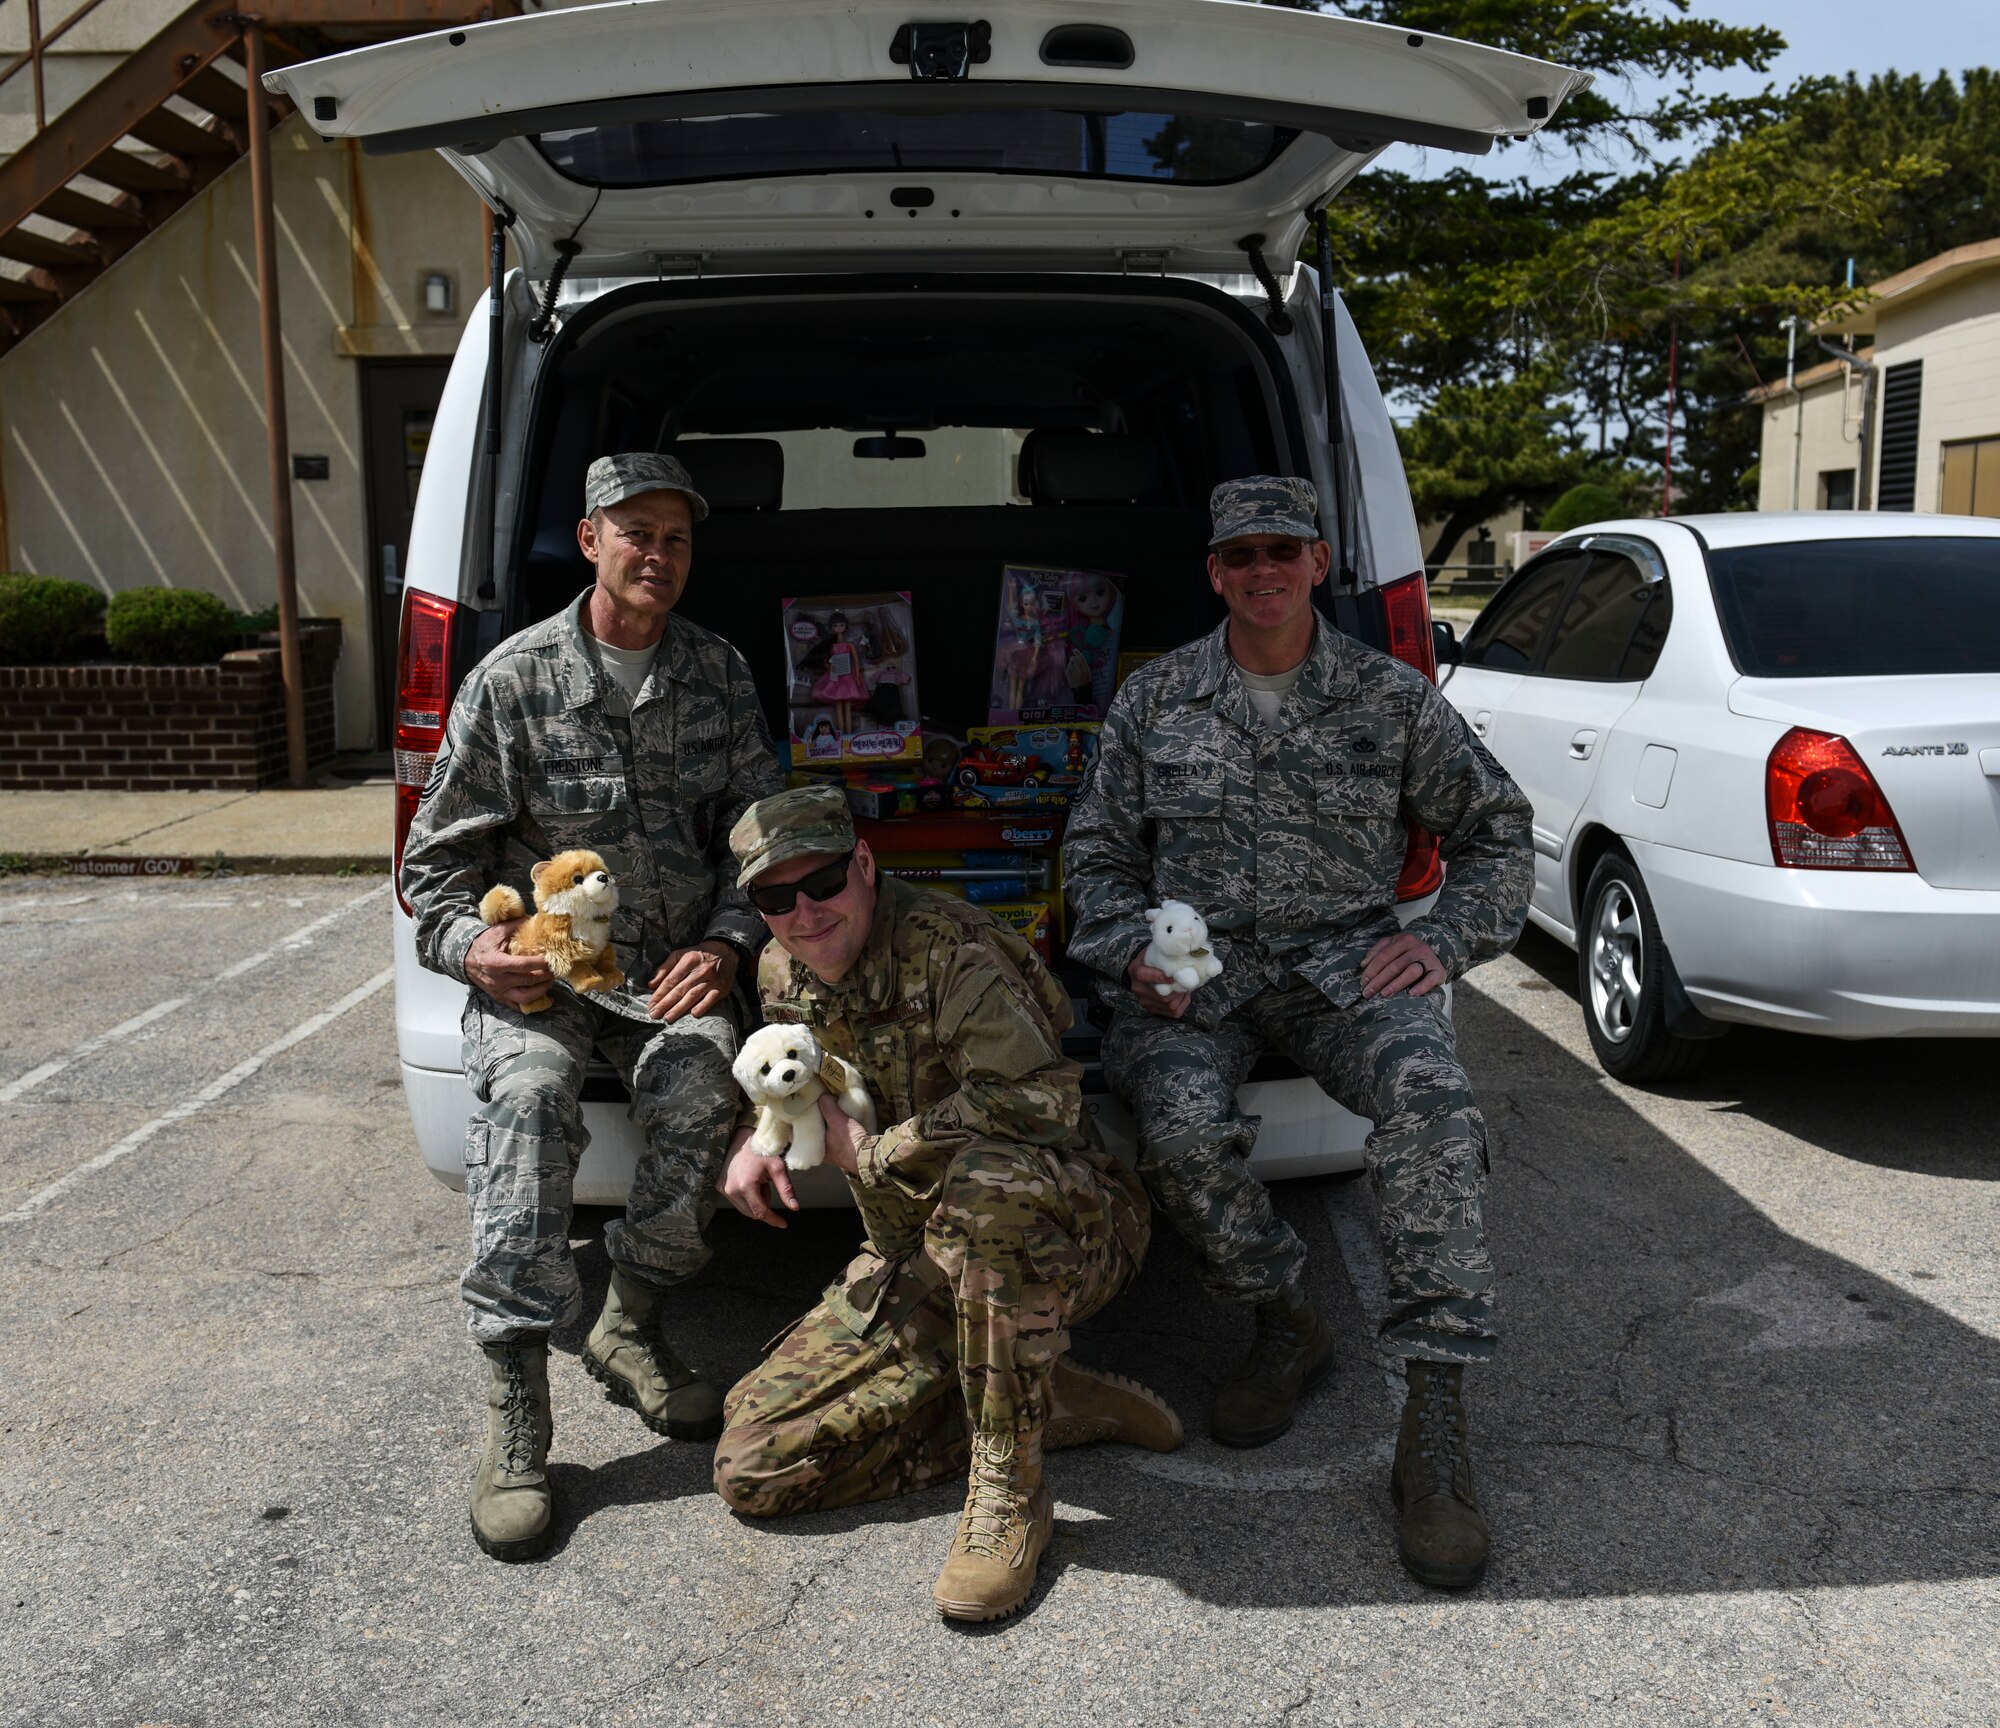 Senior non-commissioned officers from the 176th Civil Engineer Squadron, Joint Base Elmendorf-Richardson, Alaska, pose for a photo at Kunsan Air Base, Republic of Korea, April 17, 2019. The 176th CES sent members on a training deployment and during their time in Korea raised money and donated toys to a local orphanage. (U.S. Air Force photo by Senior Airman Stefan Alvarez)